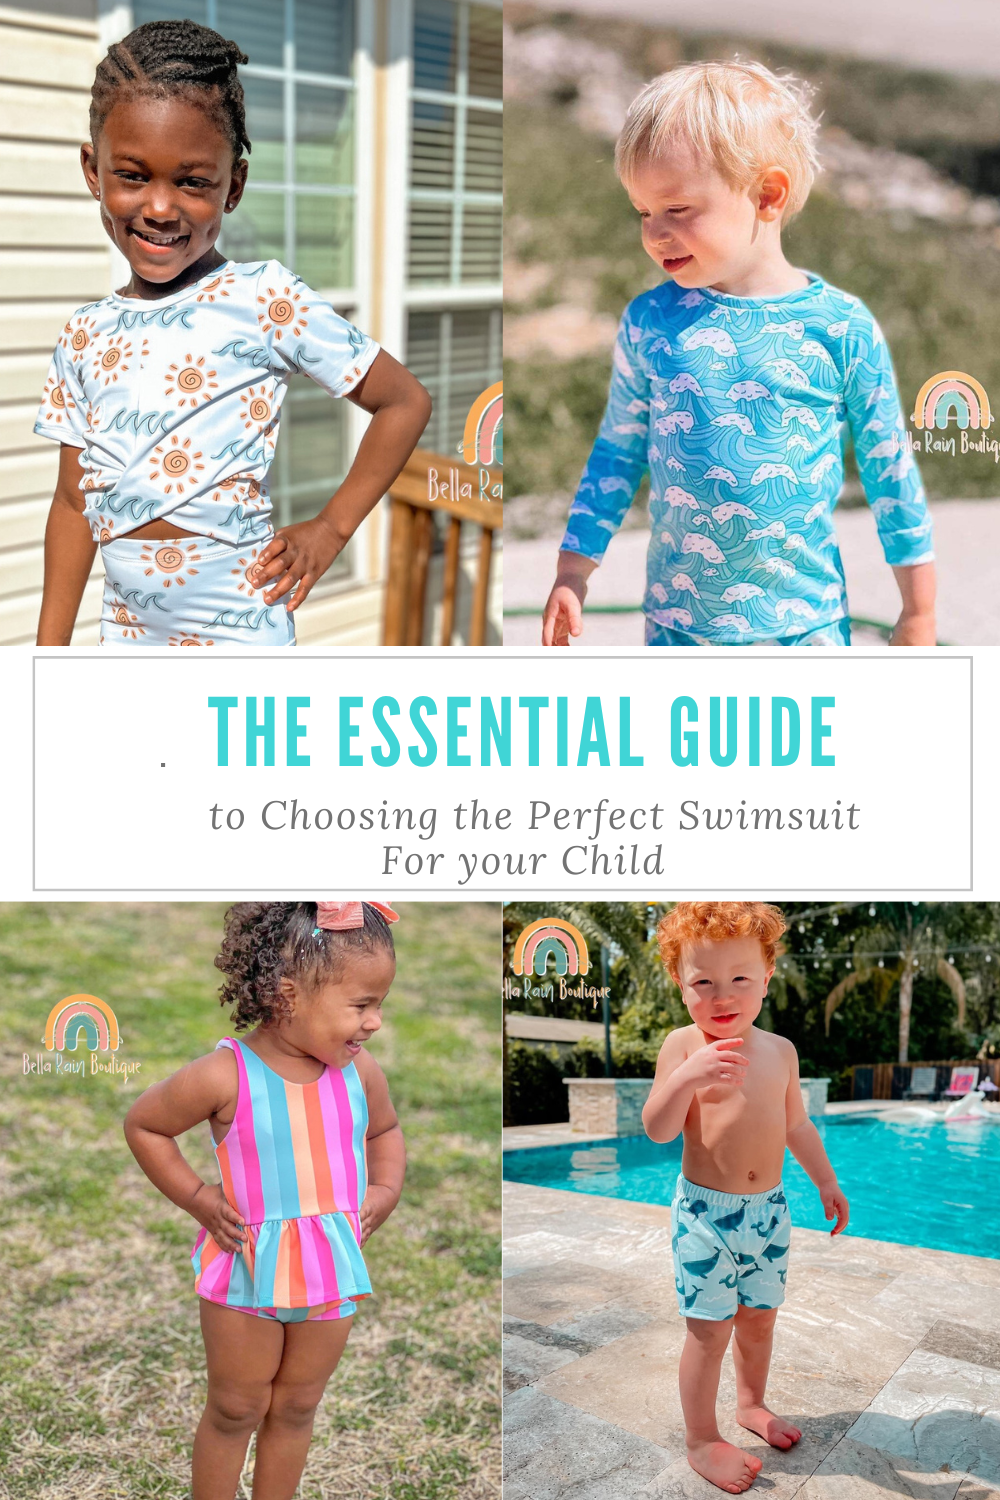 The Essential Guide to Choosing the Perfect Swimsuit For your Child